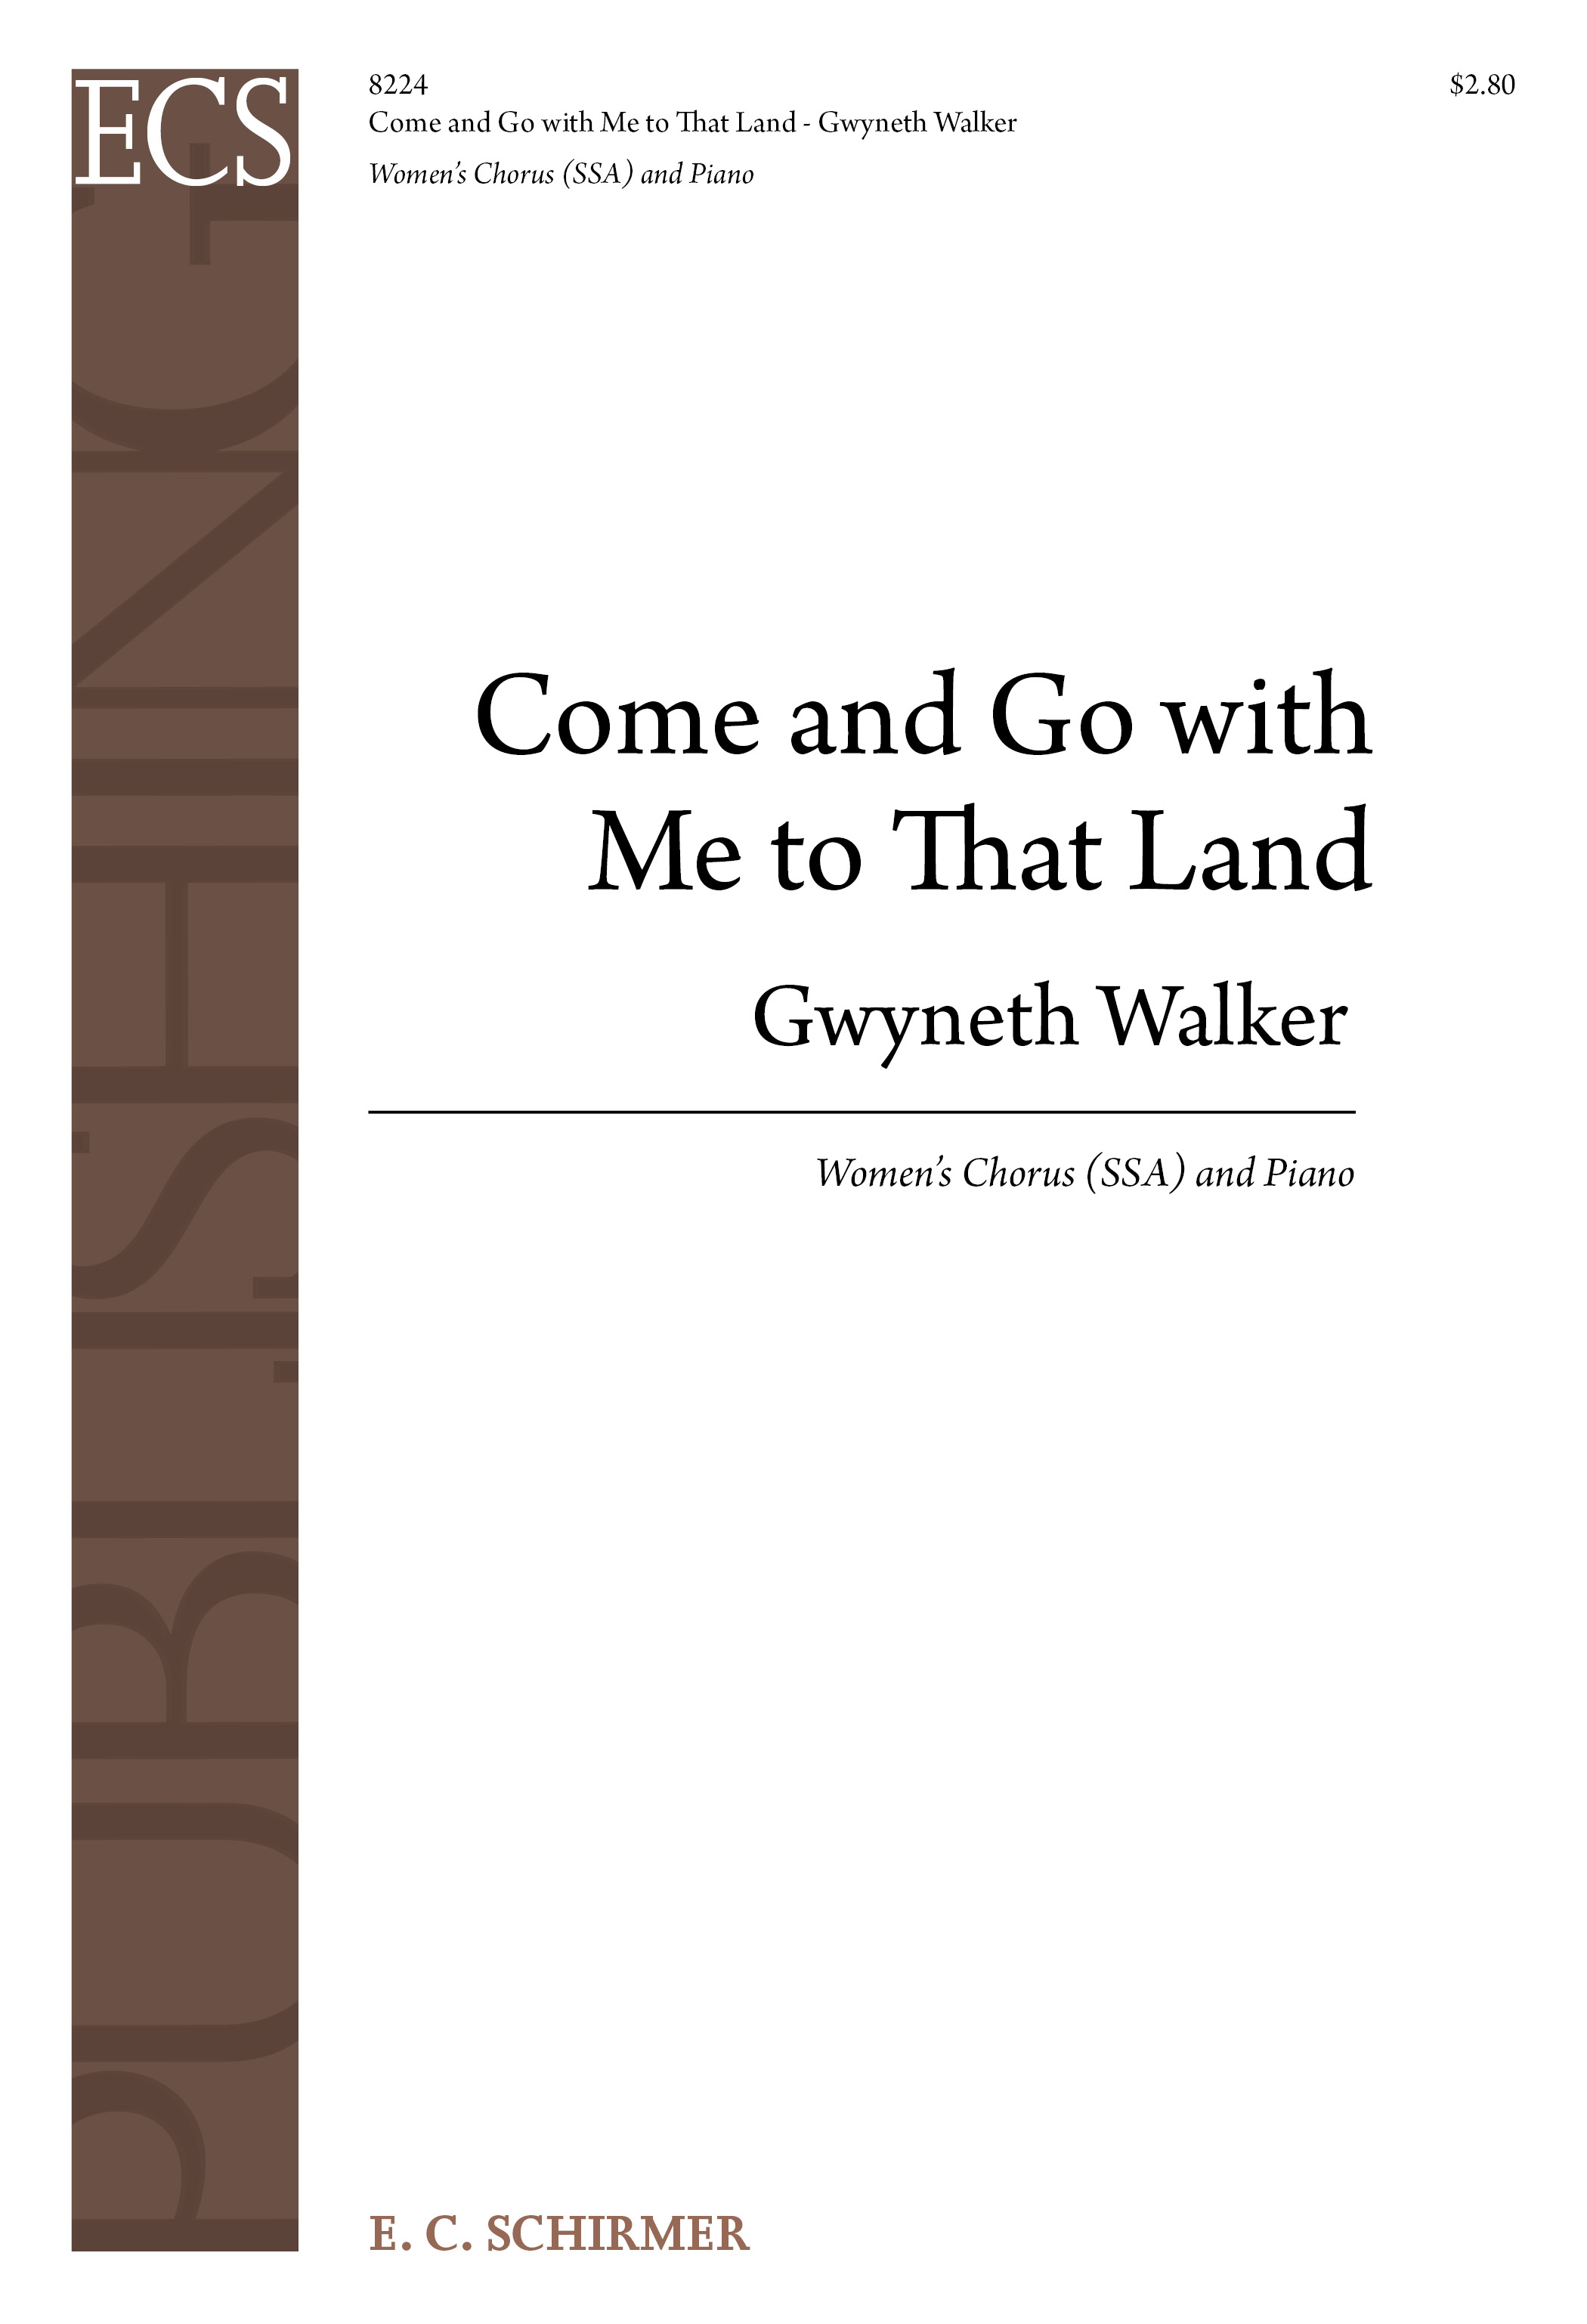 Gospel Songs: Come and Go with Me to That Land : SSA : Gwyneth Walker : Gwyneth Walker : Sheet Music : 8224